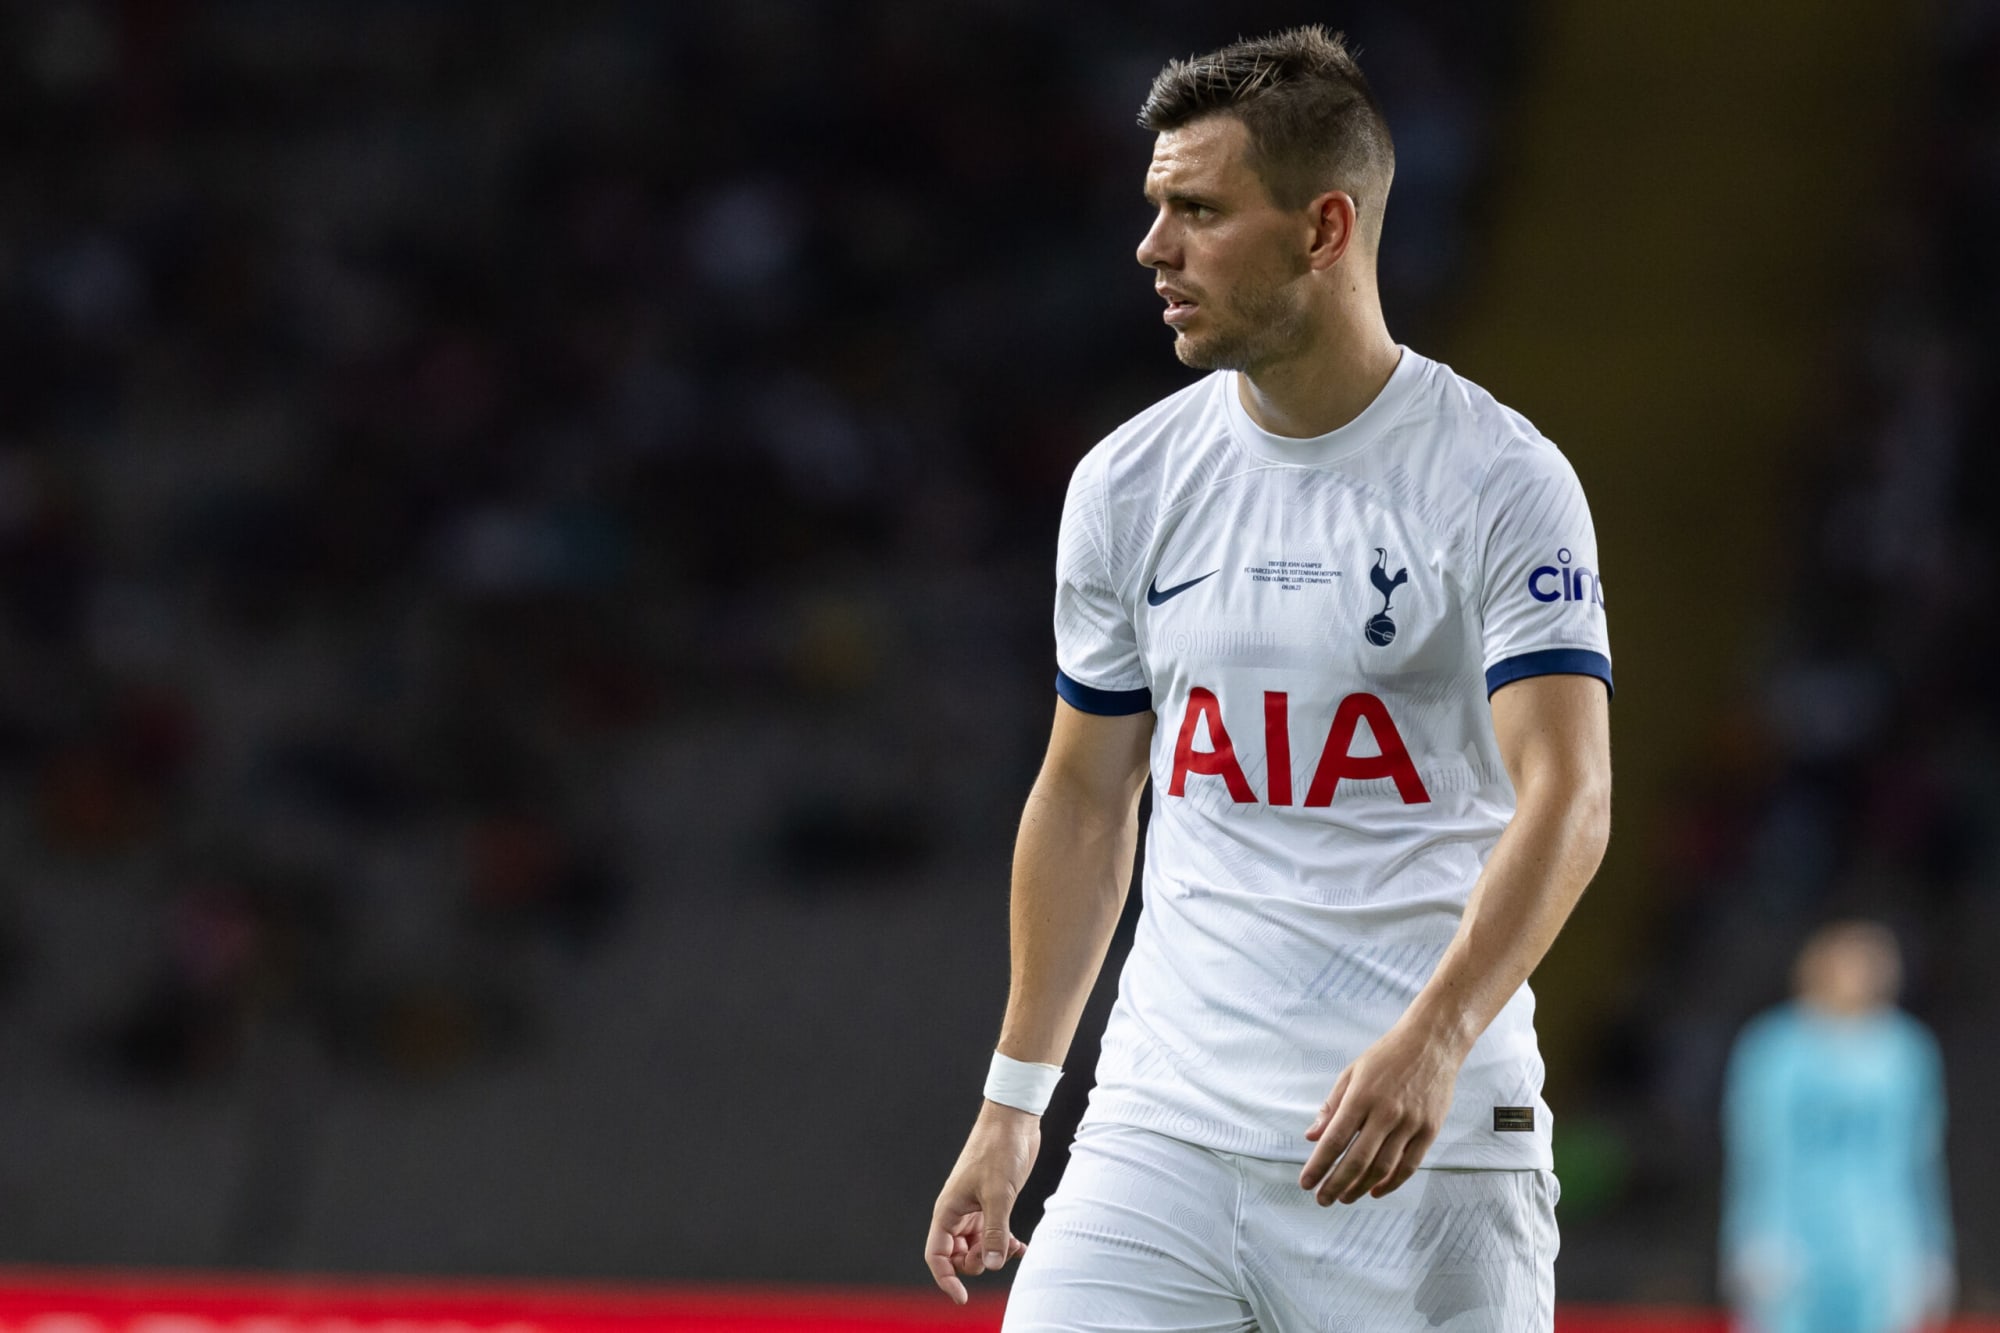 A transfer rumour keeps popping up that Tottenham shouldn’t consider